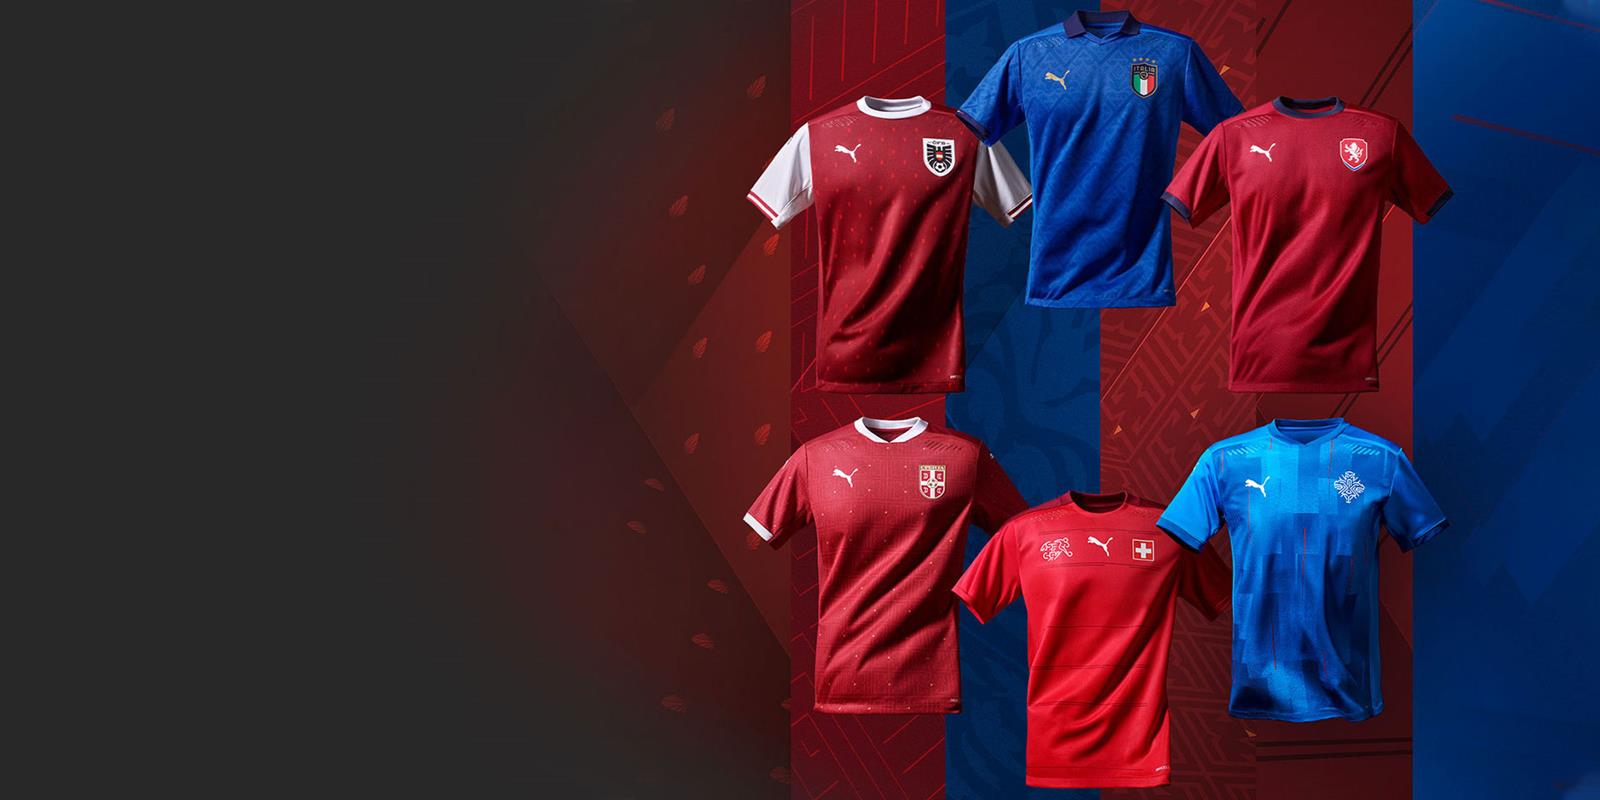 DROPS KITS FOR THE EURO 2021